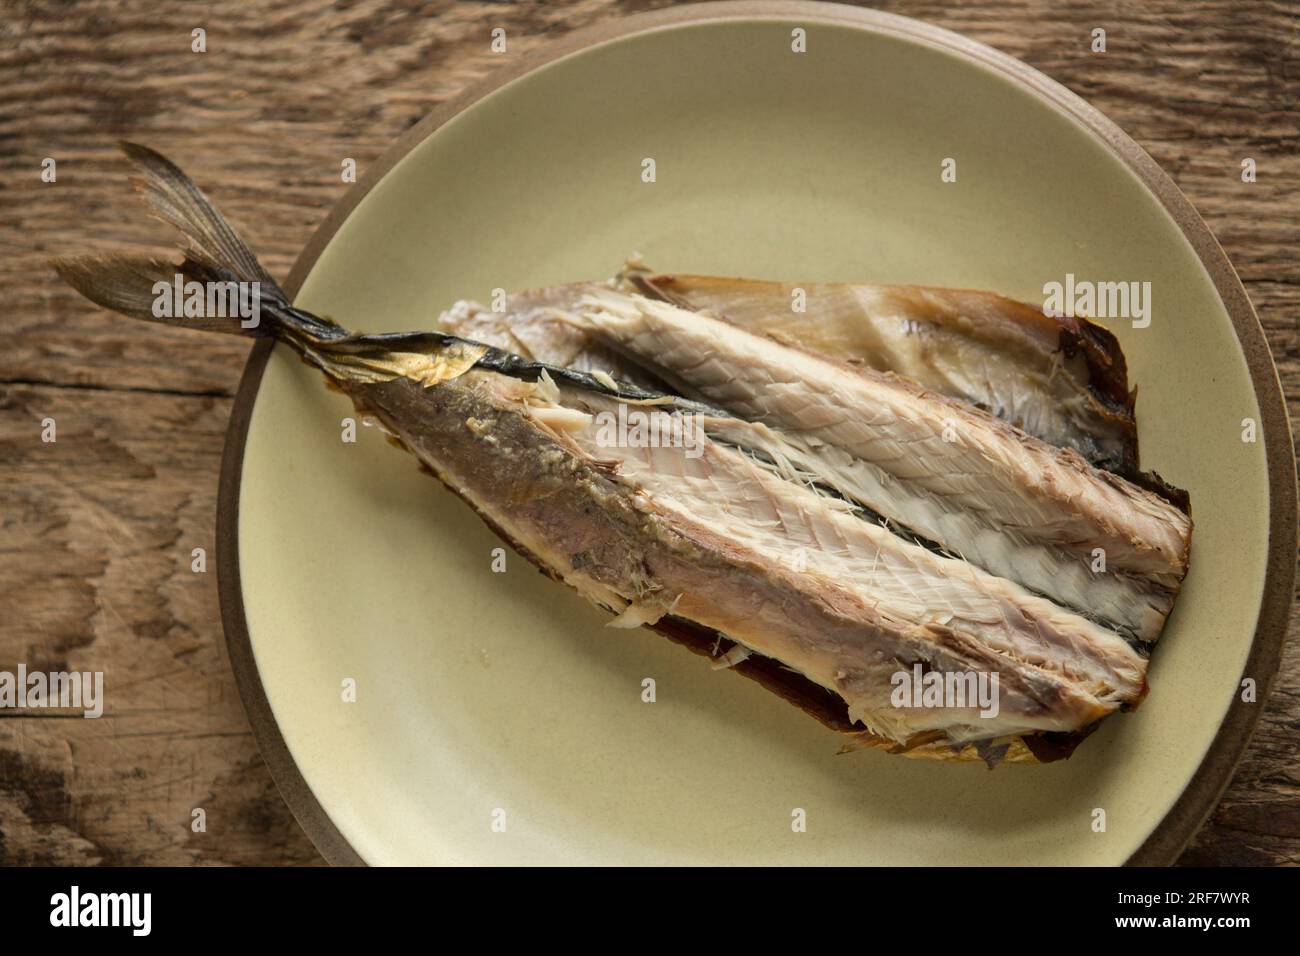 A hot smoked mackerel, Scomber scombrus, that is being prepared to make a homemade mackerel pate. England UK GB Stock Photo